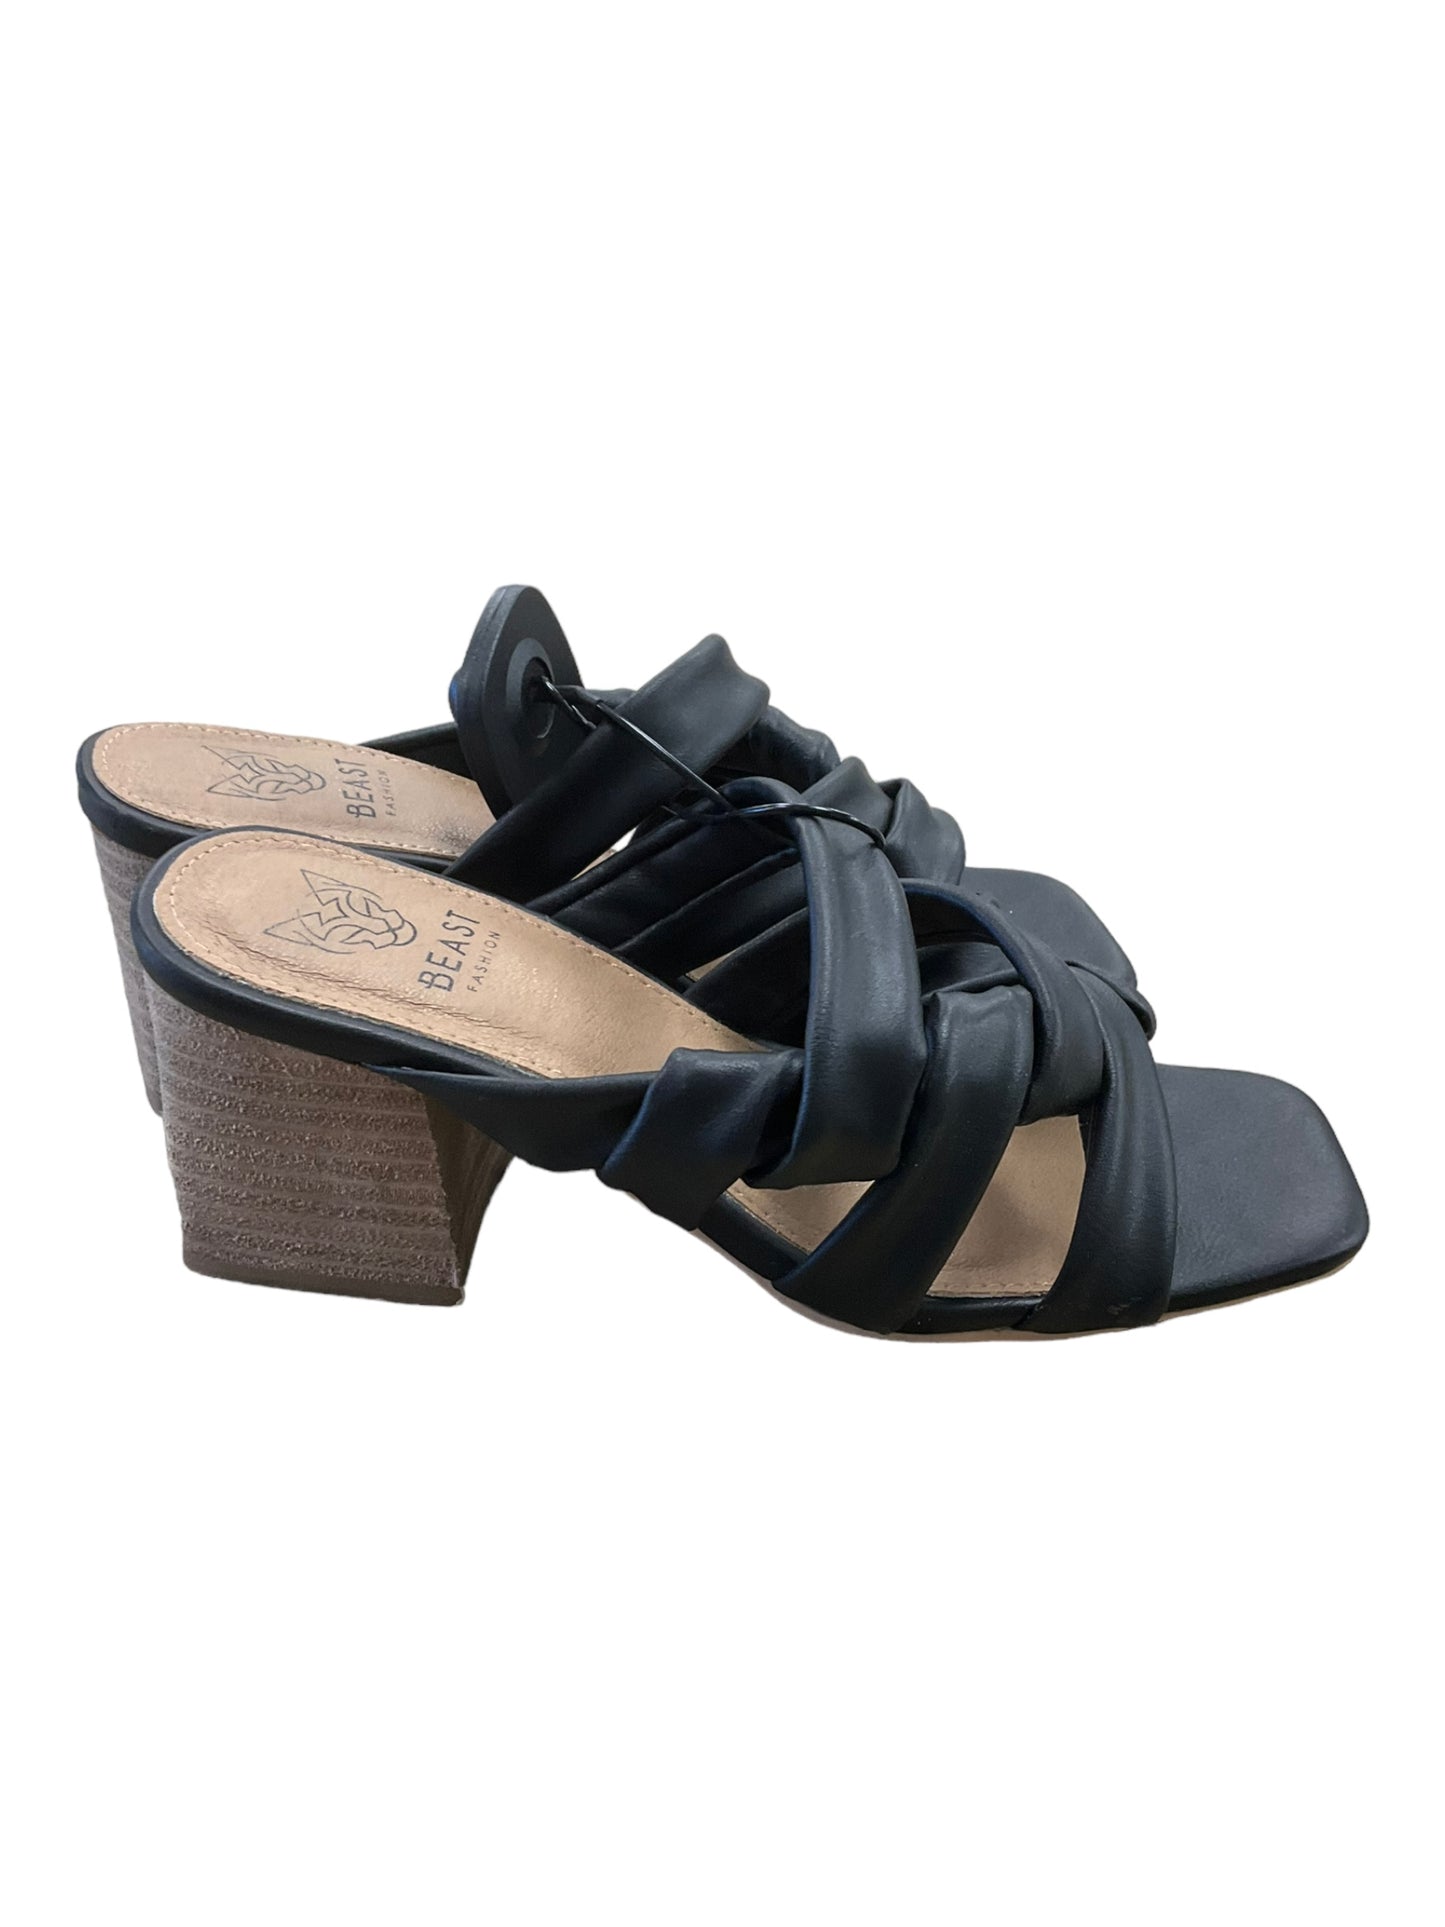 Sandals Heels Block By Clothes Mentor  Size: 5.5